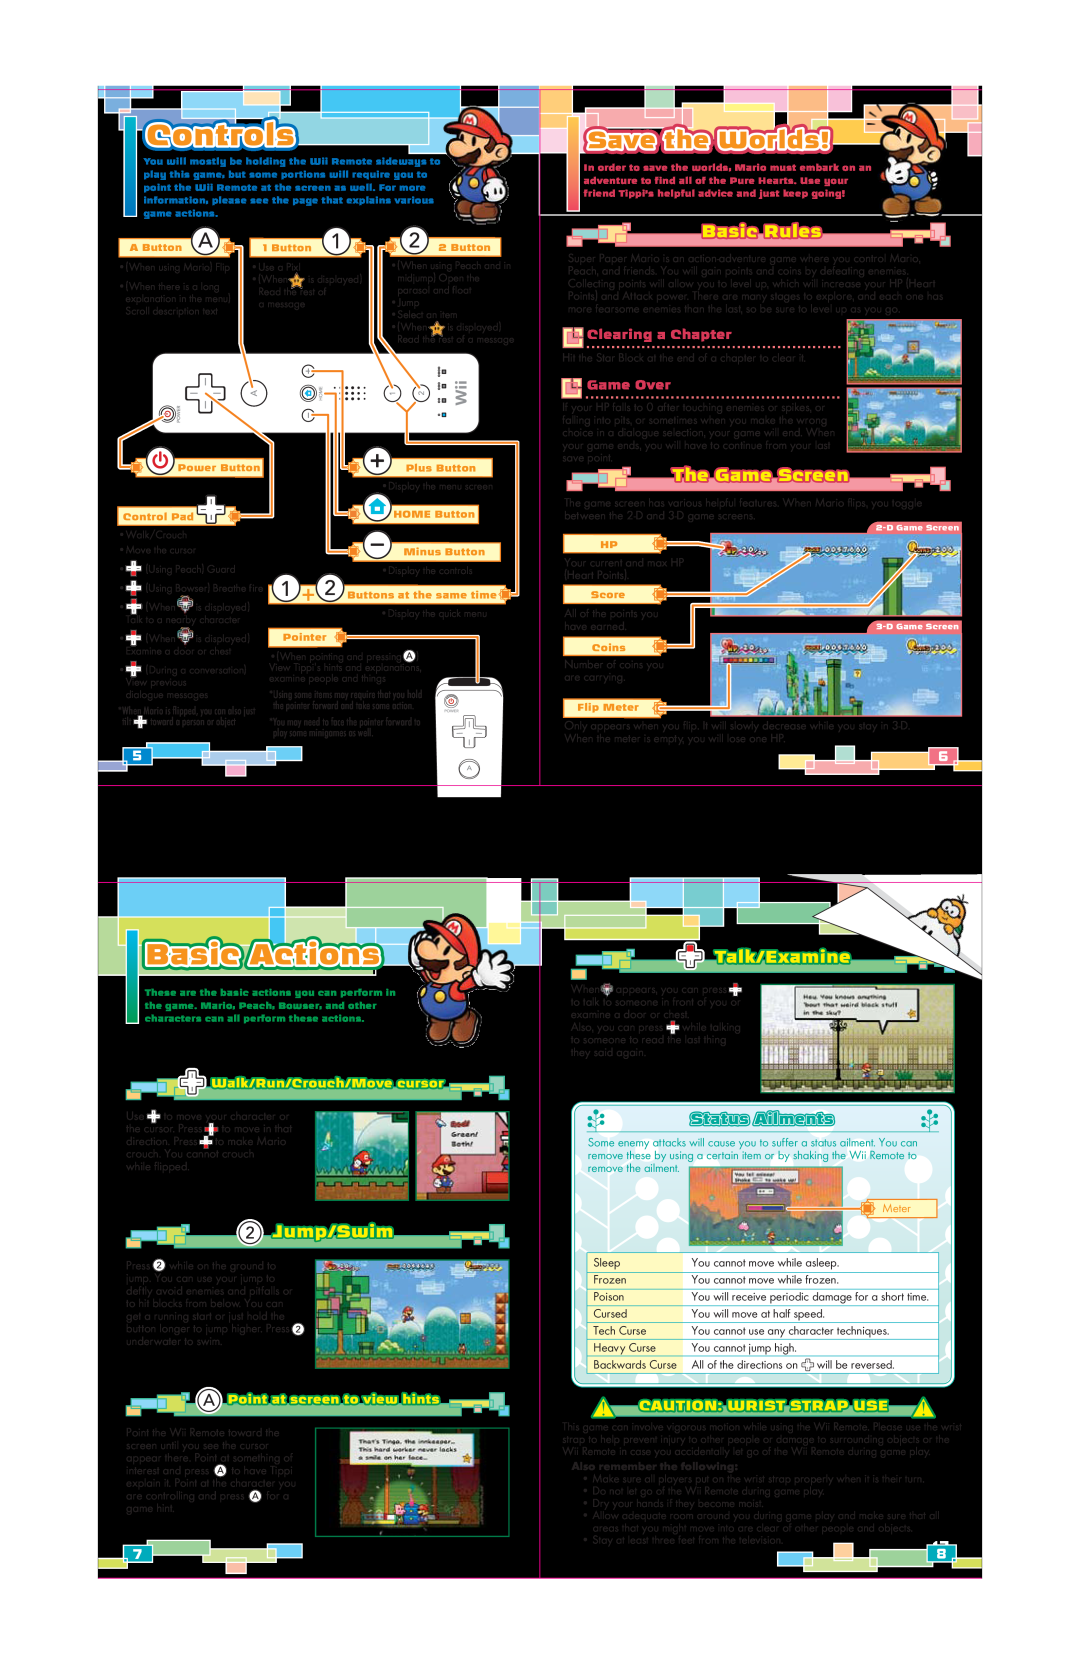 Nintendo 45496902629 Controls, Basic Rules, The Game Screen, Jump/Swim, Talk/Examine, Status Ailments, Clearing a Chapter 